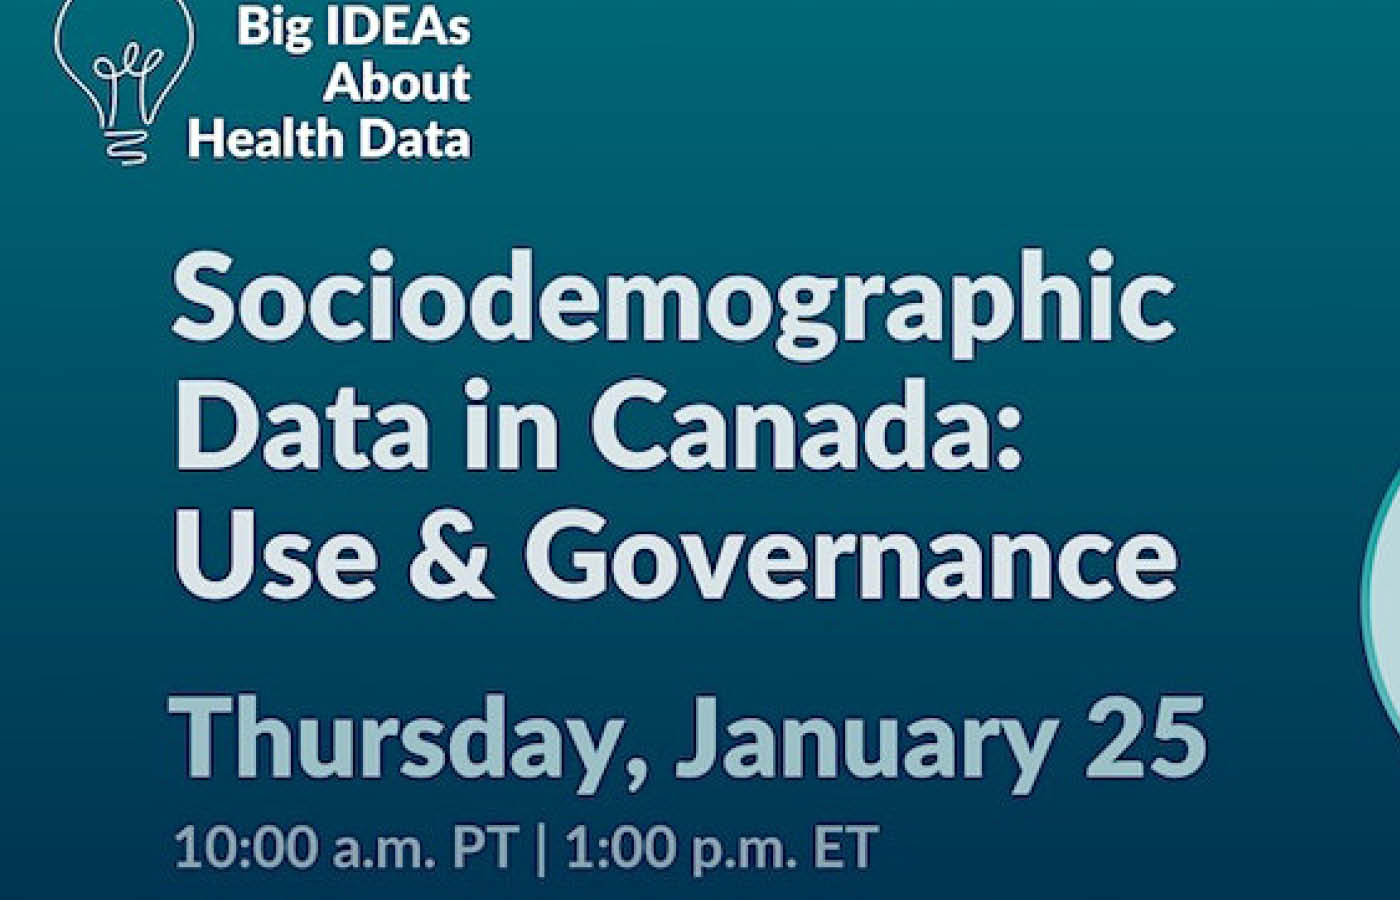 Big IDEAs About Health Data: Sociodemographic Data in Canada